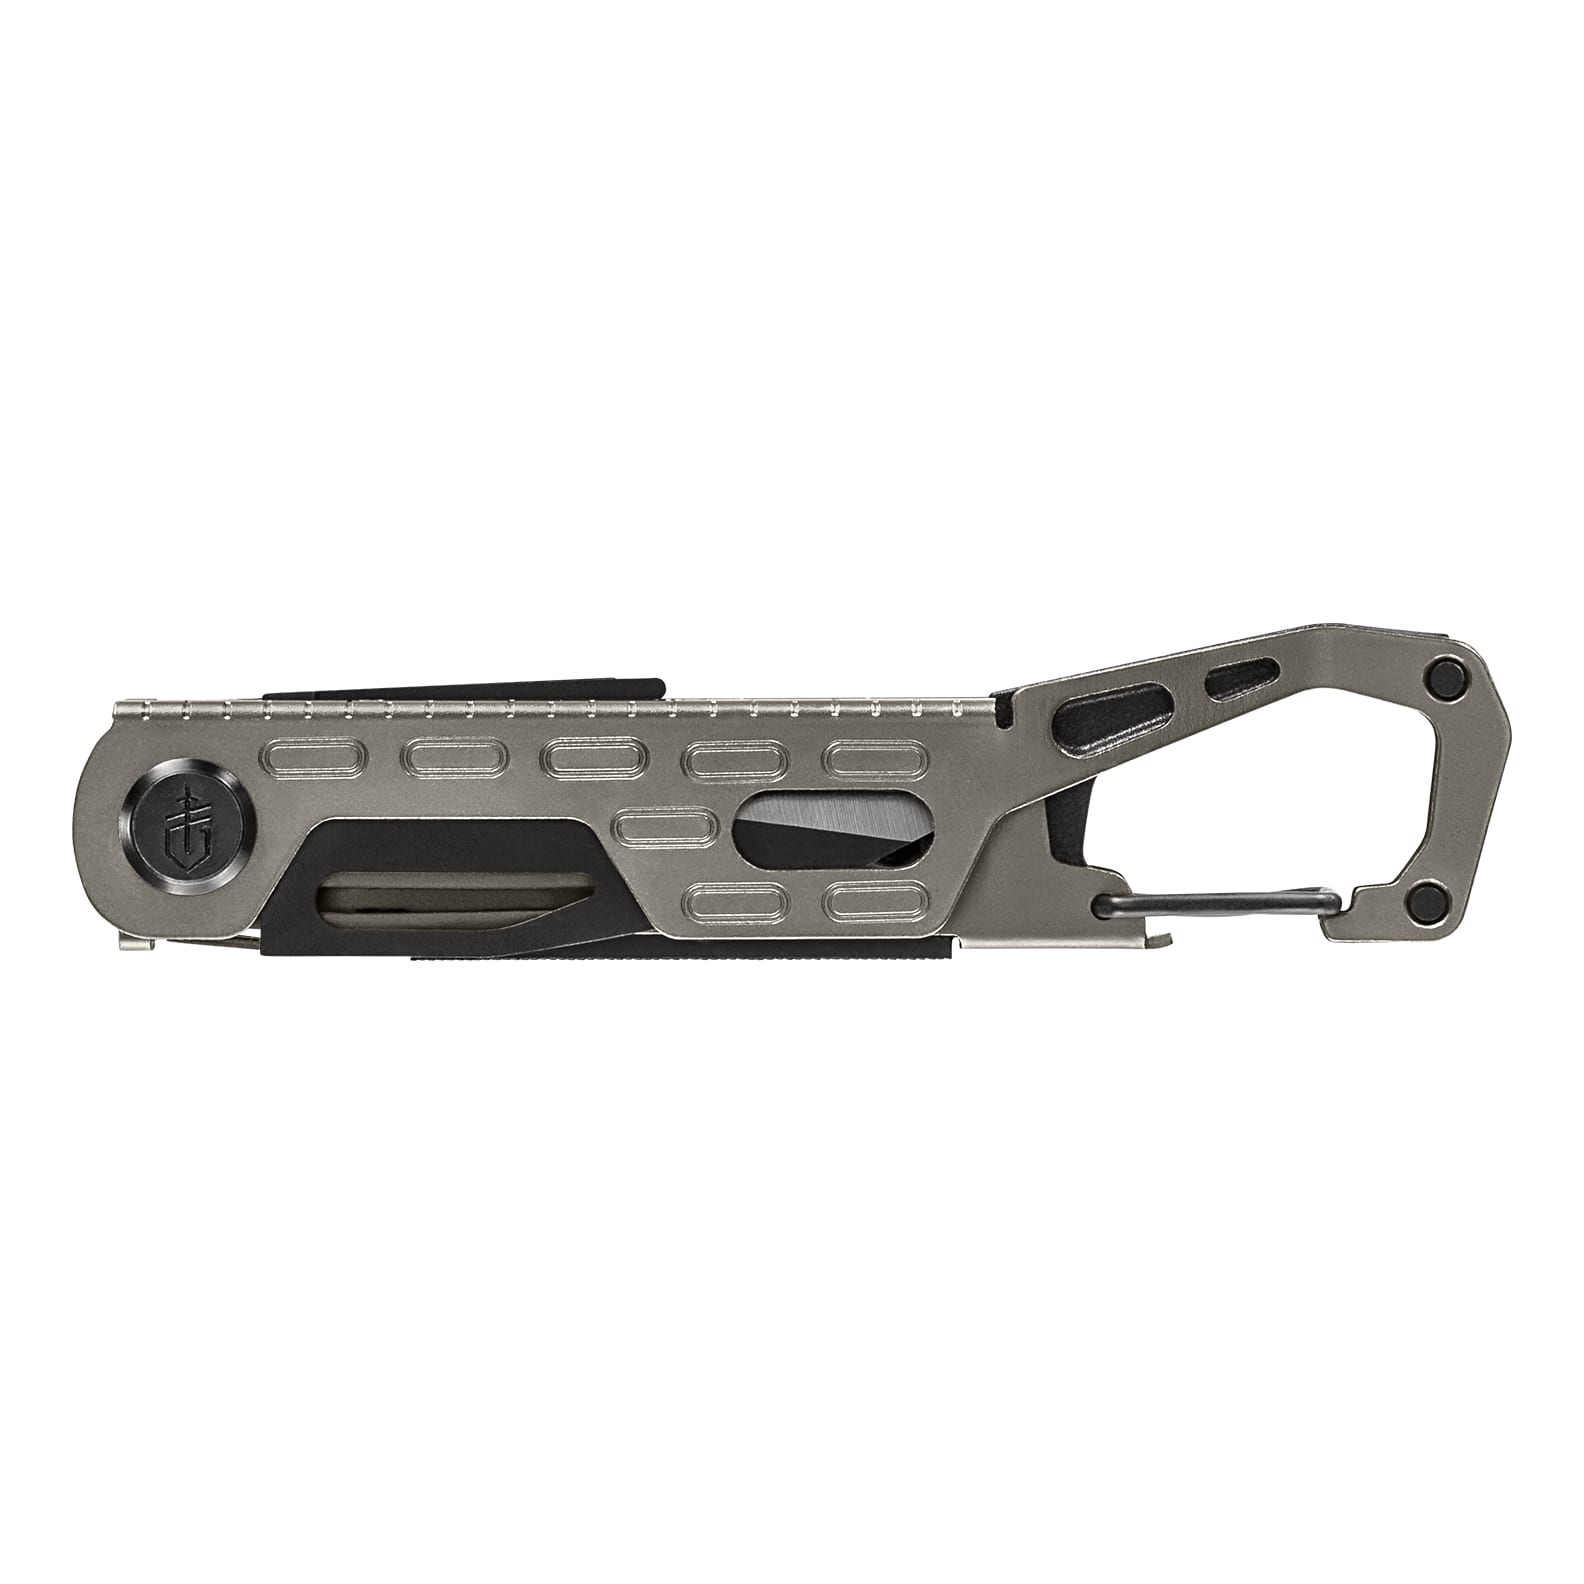 Gerber® StakeOut Multi-Tool